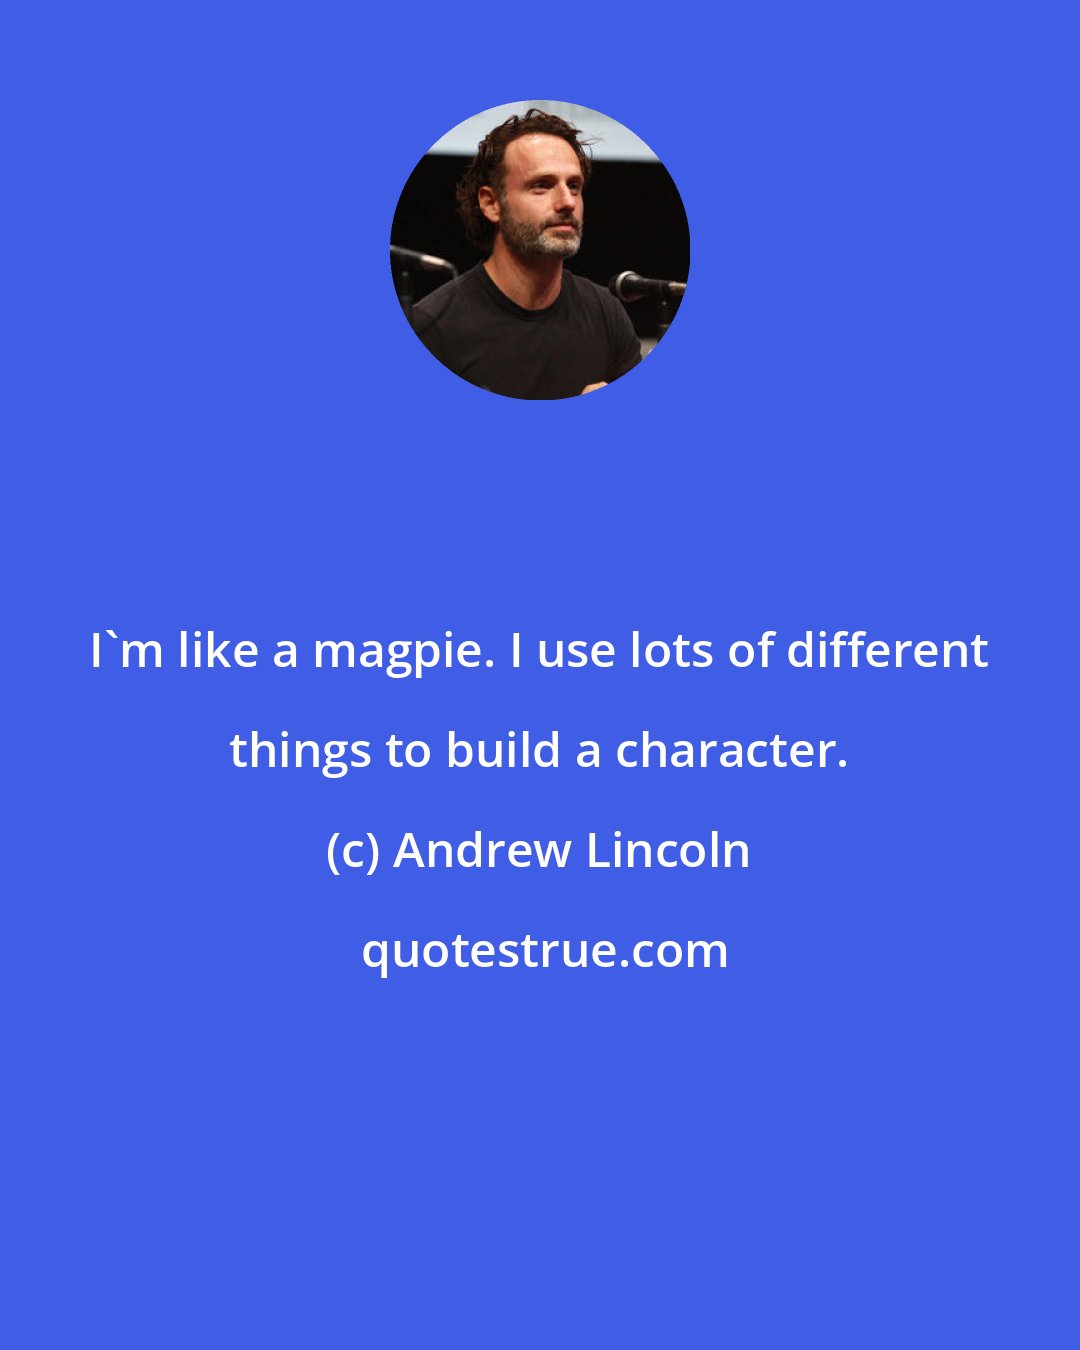 Andrew Lincoln: I'm like a magpie. I use lots of different things to build a character.